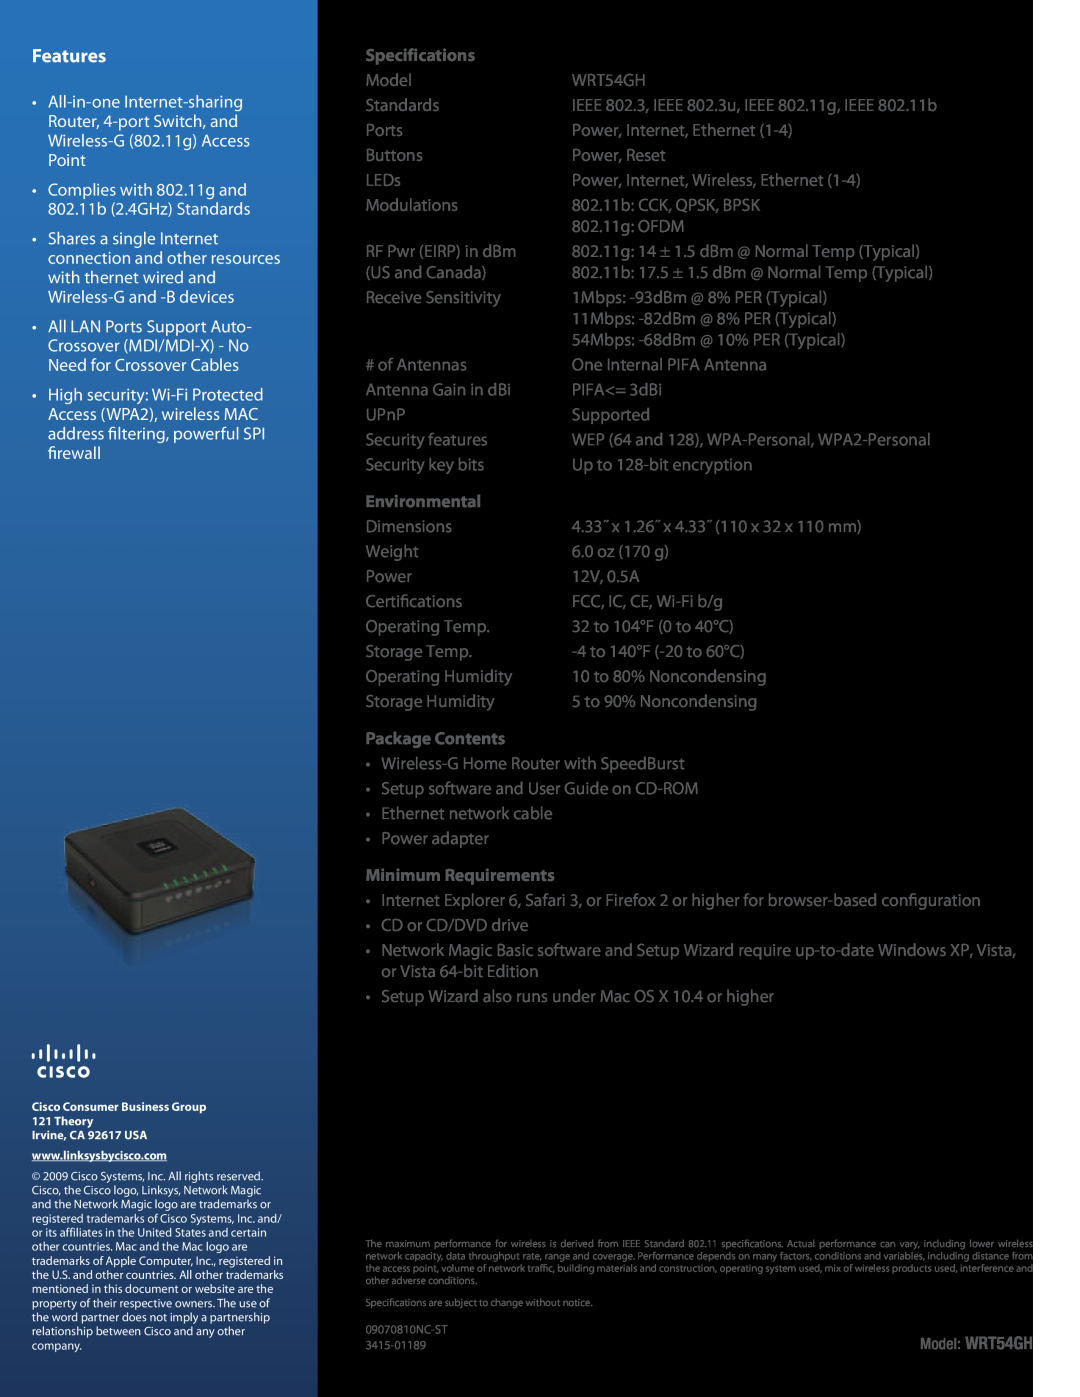 Cisco Systems WRT54GH manual Features, Specifications, Environmental, Package Contents, Minimum Requirements 